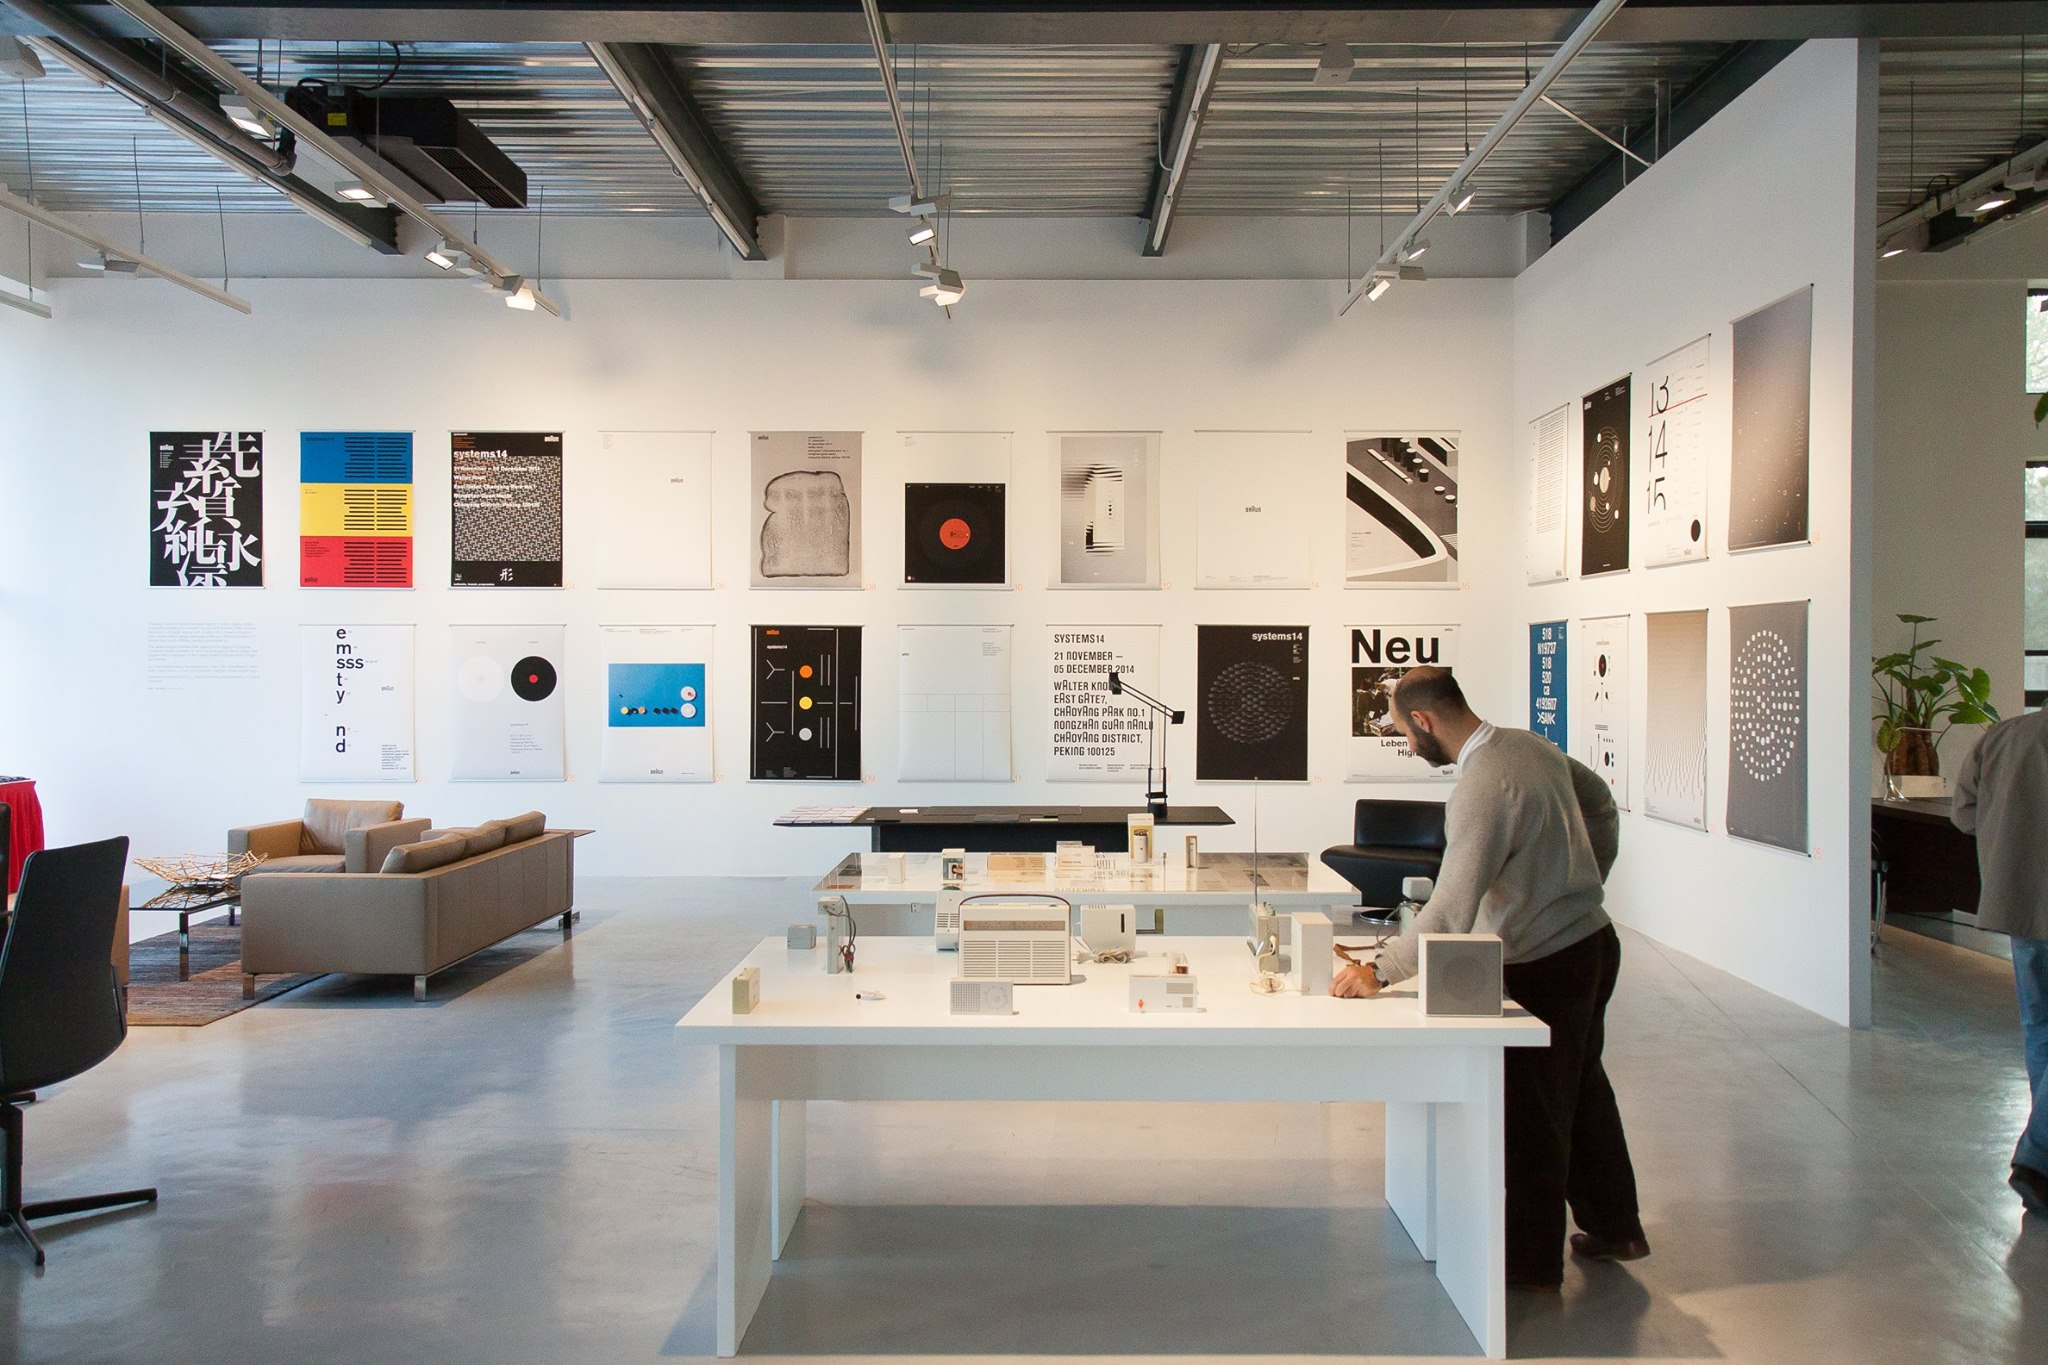 Systems14 Exhibition Beijing with Walter Knoll